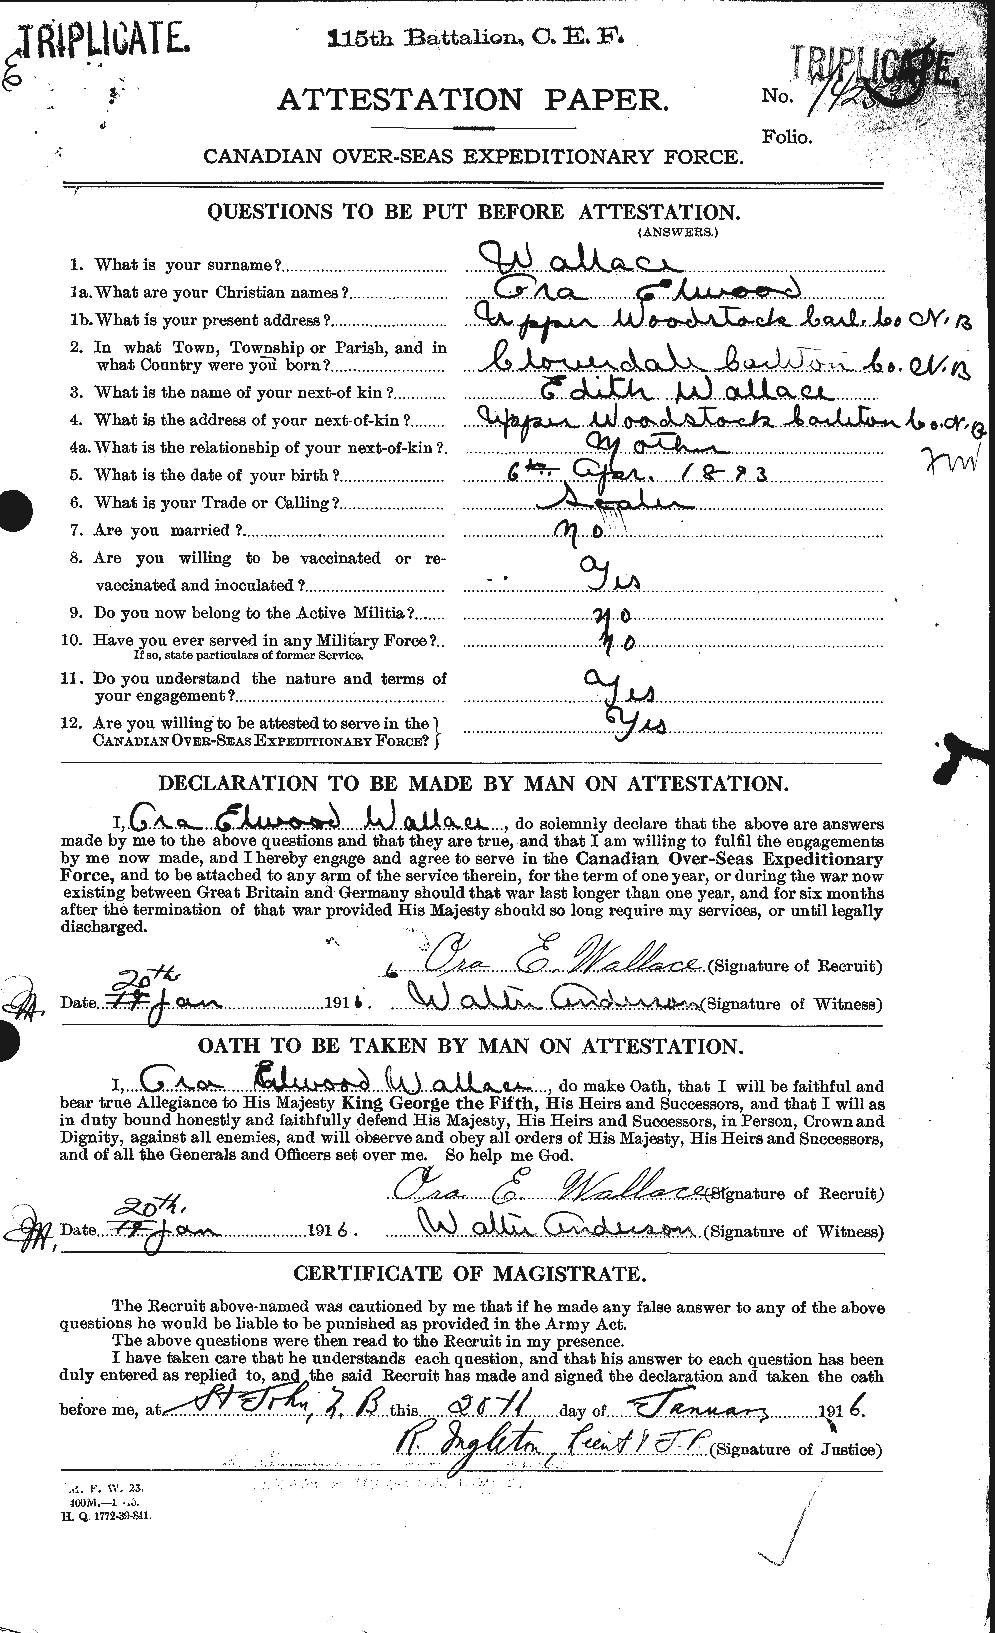 Personnel Records of the First World War - CEF 654687a